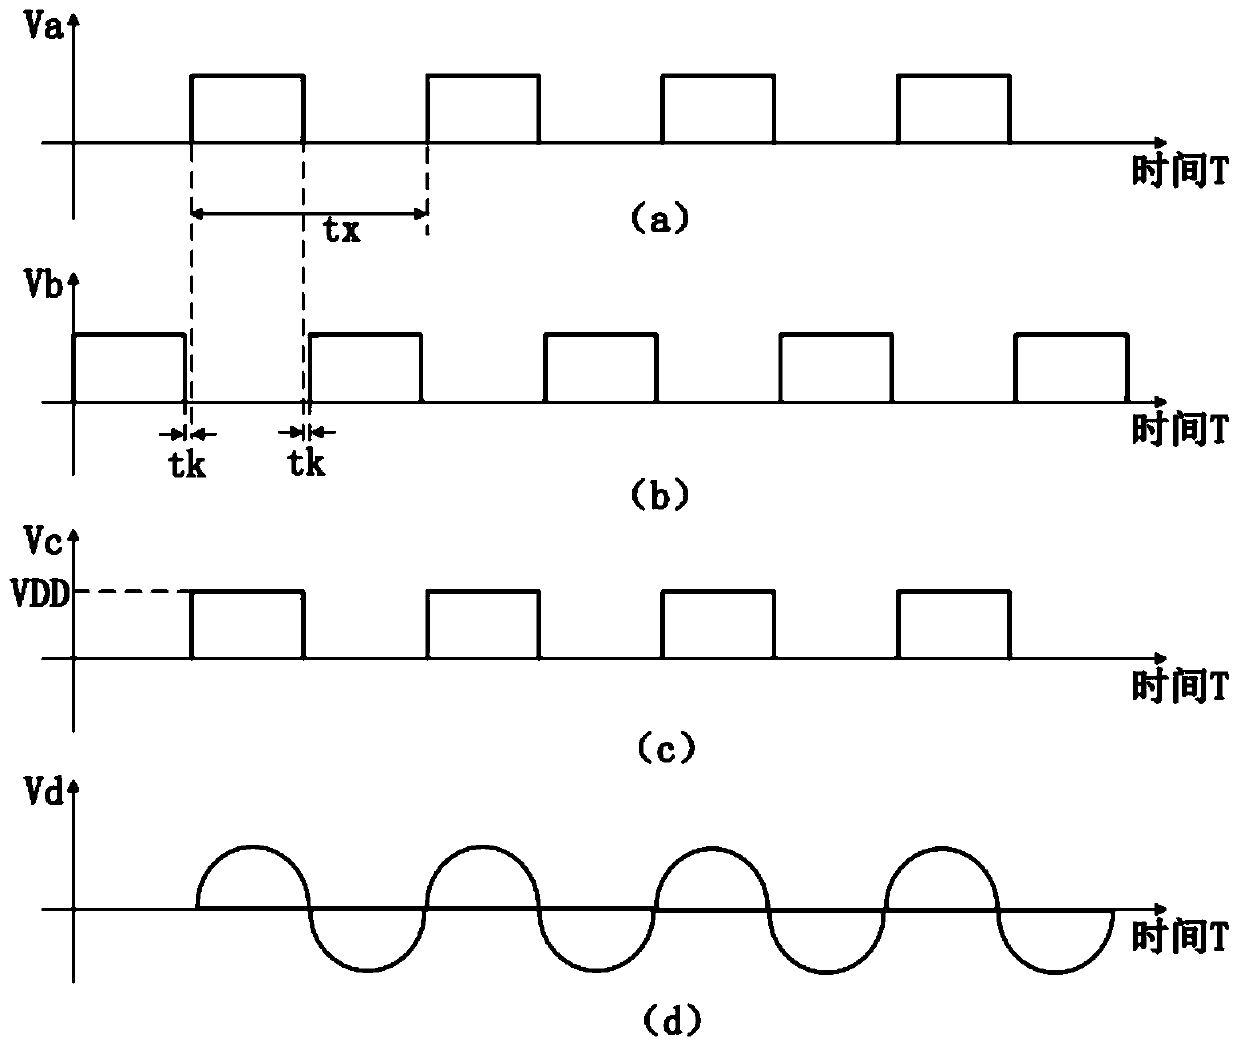 A driving circuit for lamp power control